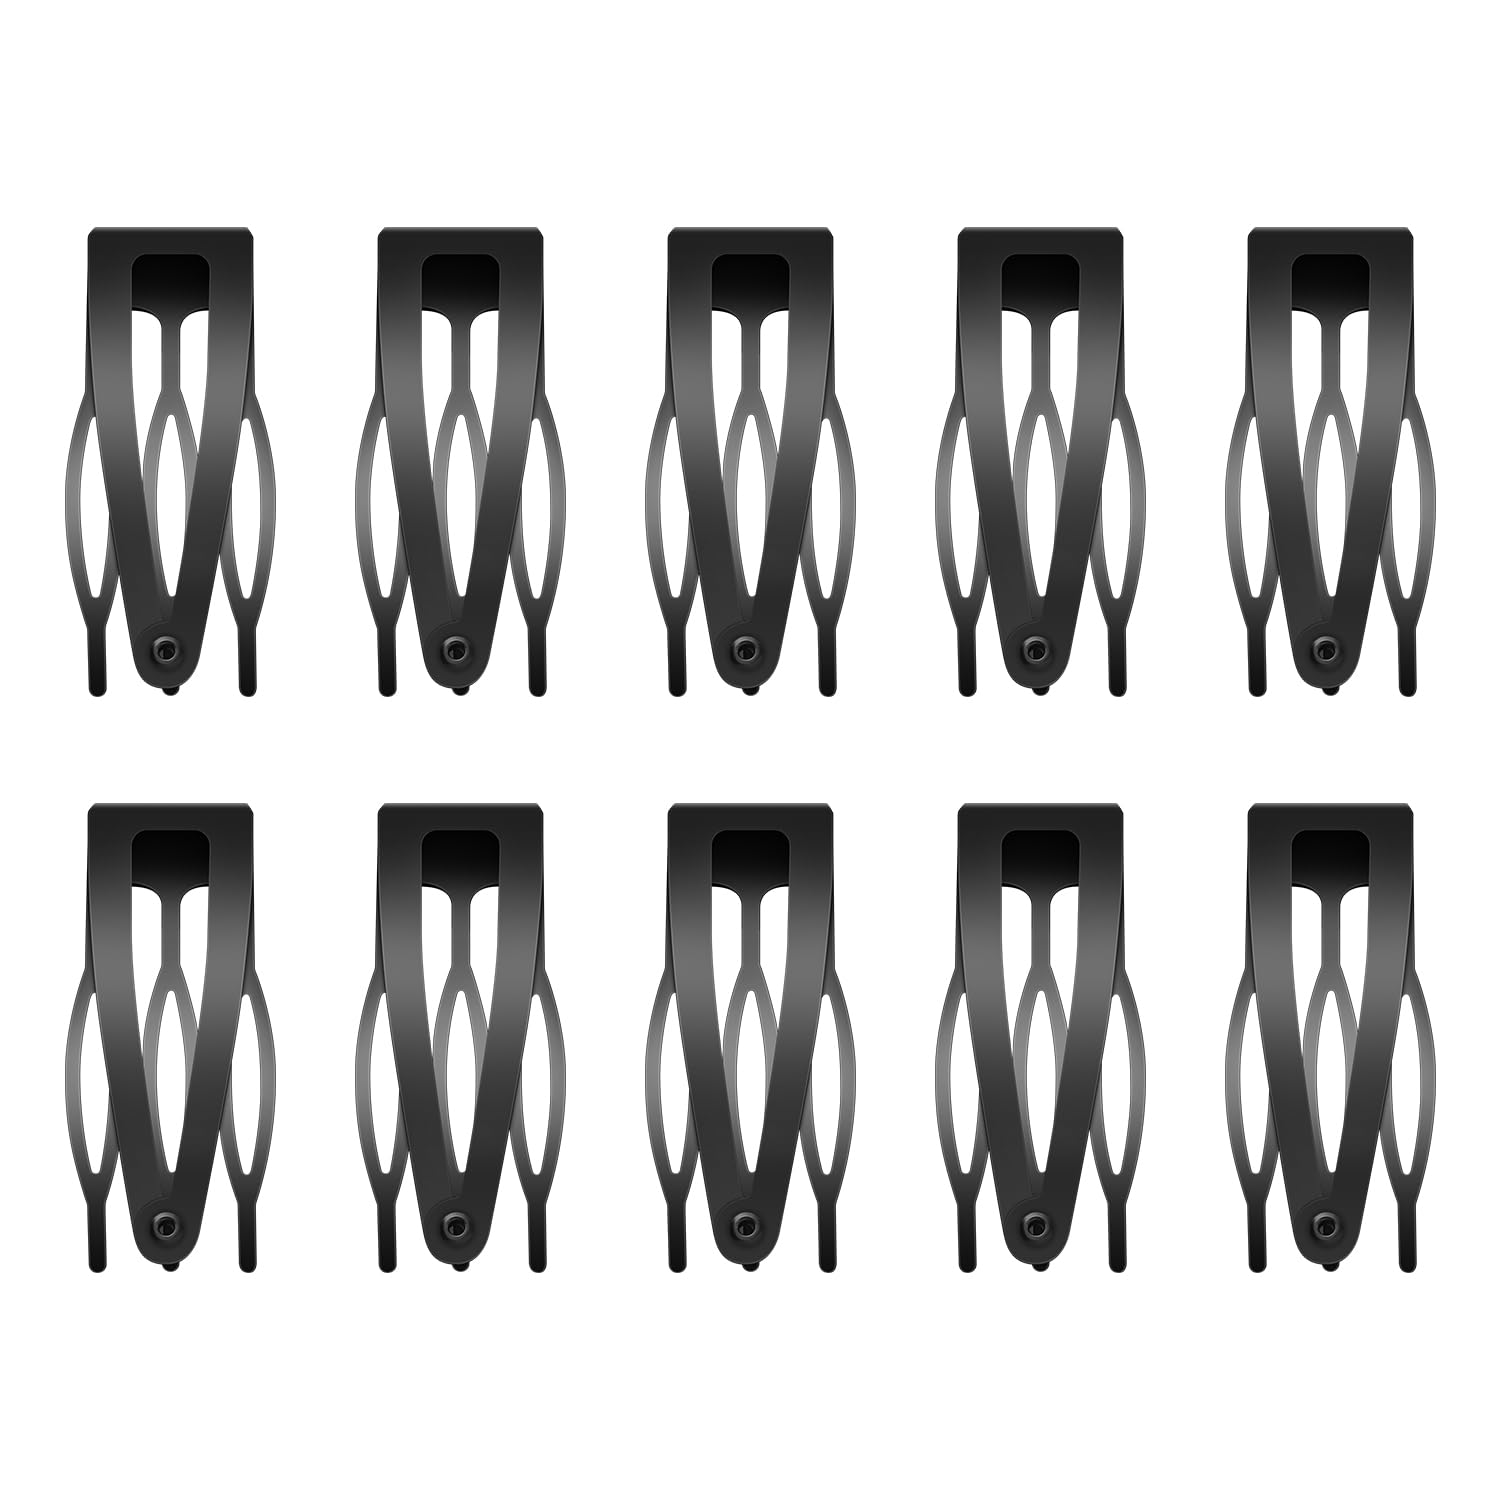 10 Pieces Double Grip Hair Clips Metal Snap Hair Accessories